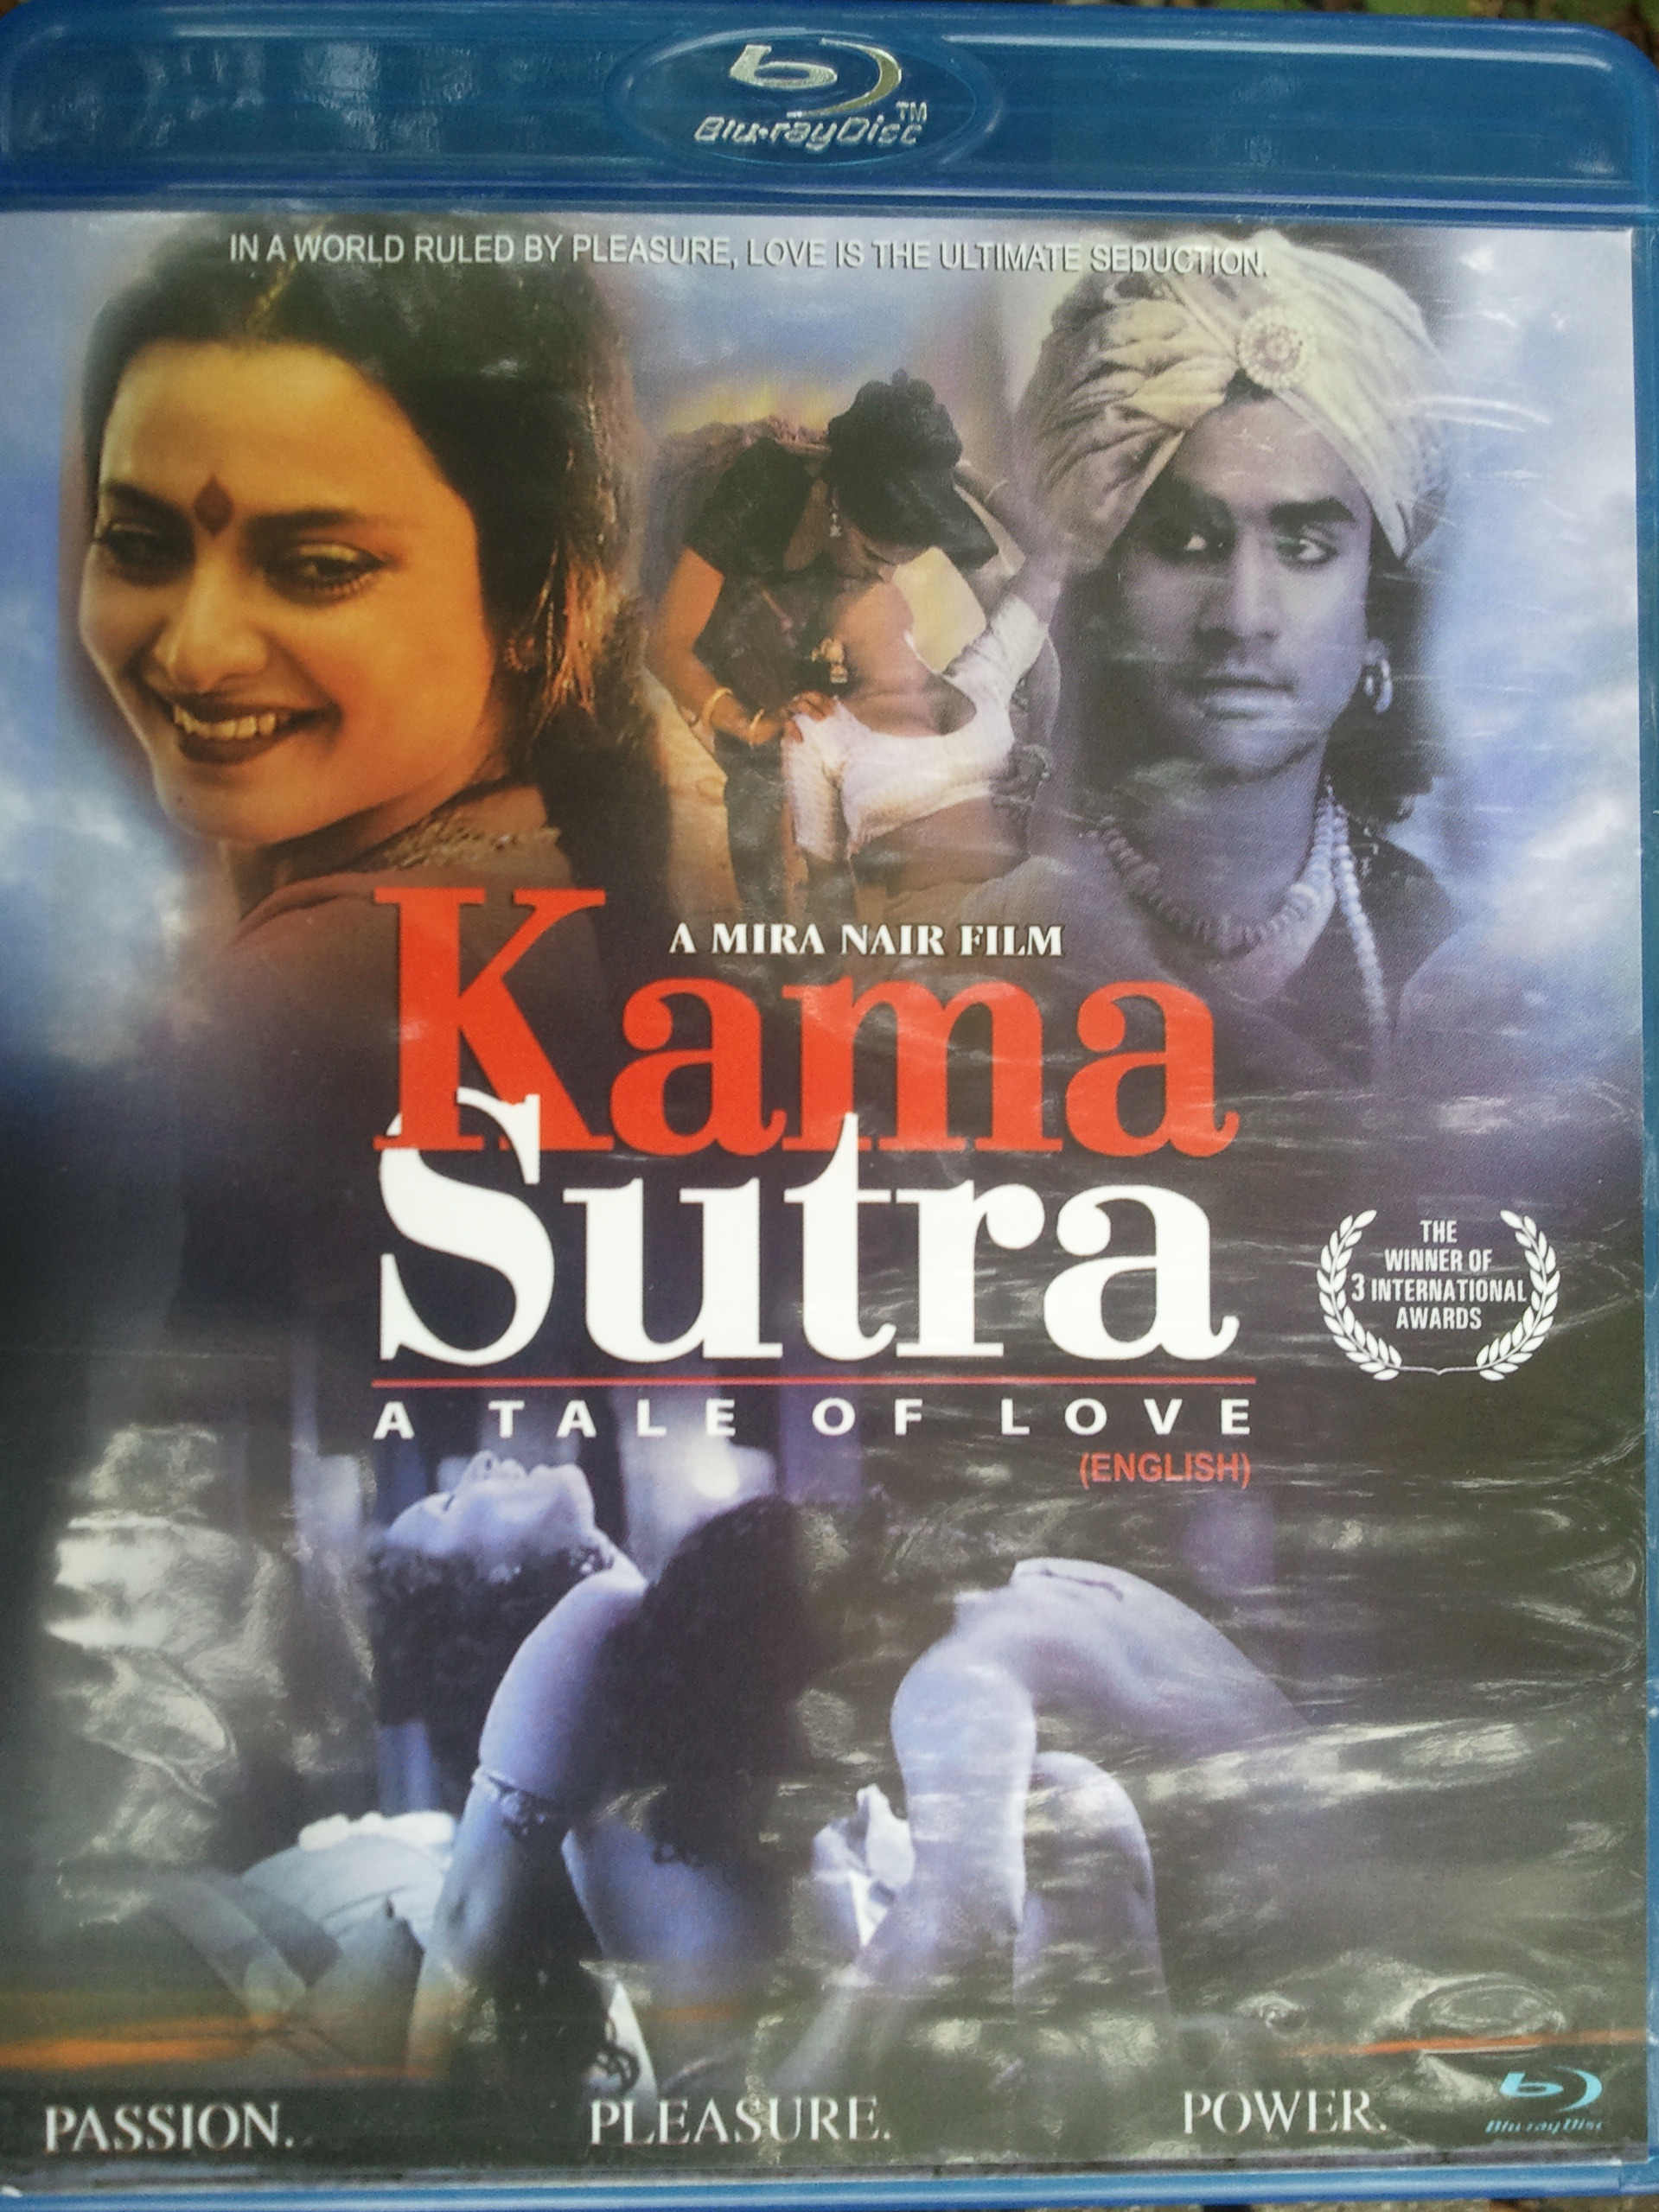 A tale love sutra: of [download] Kama